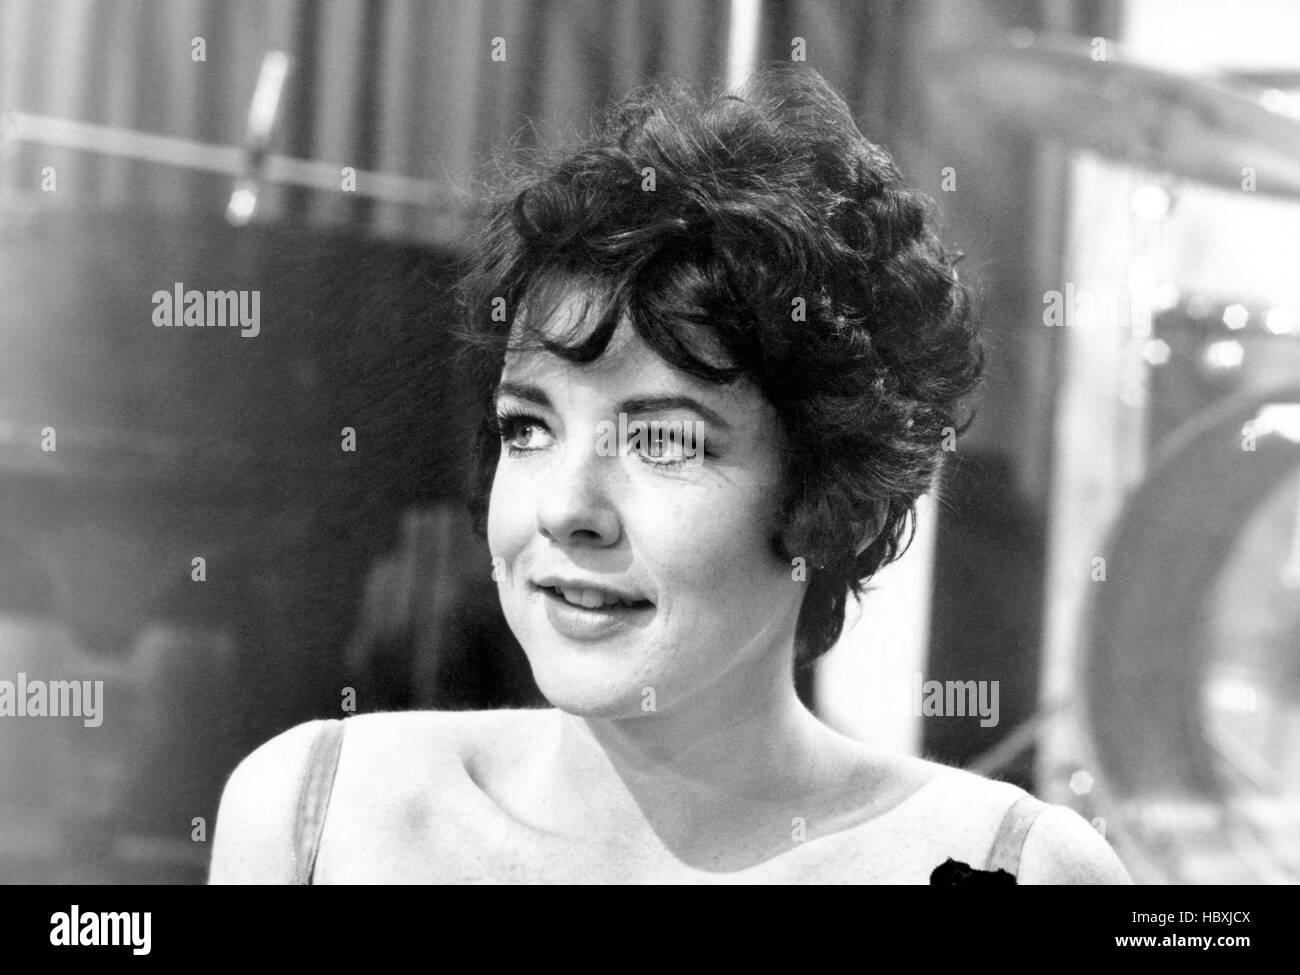 GREASE, Stockard Channing, 1978. ©Paramount/courtesy Everett Collection Stock Photo